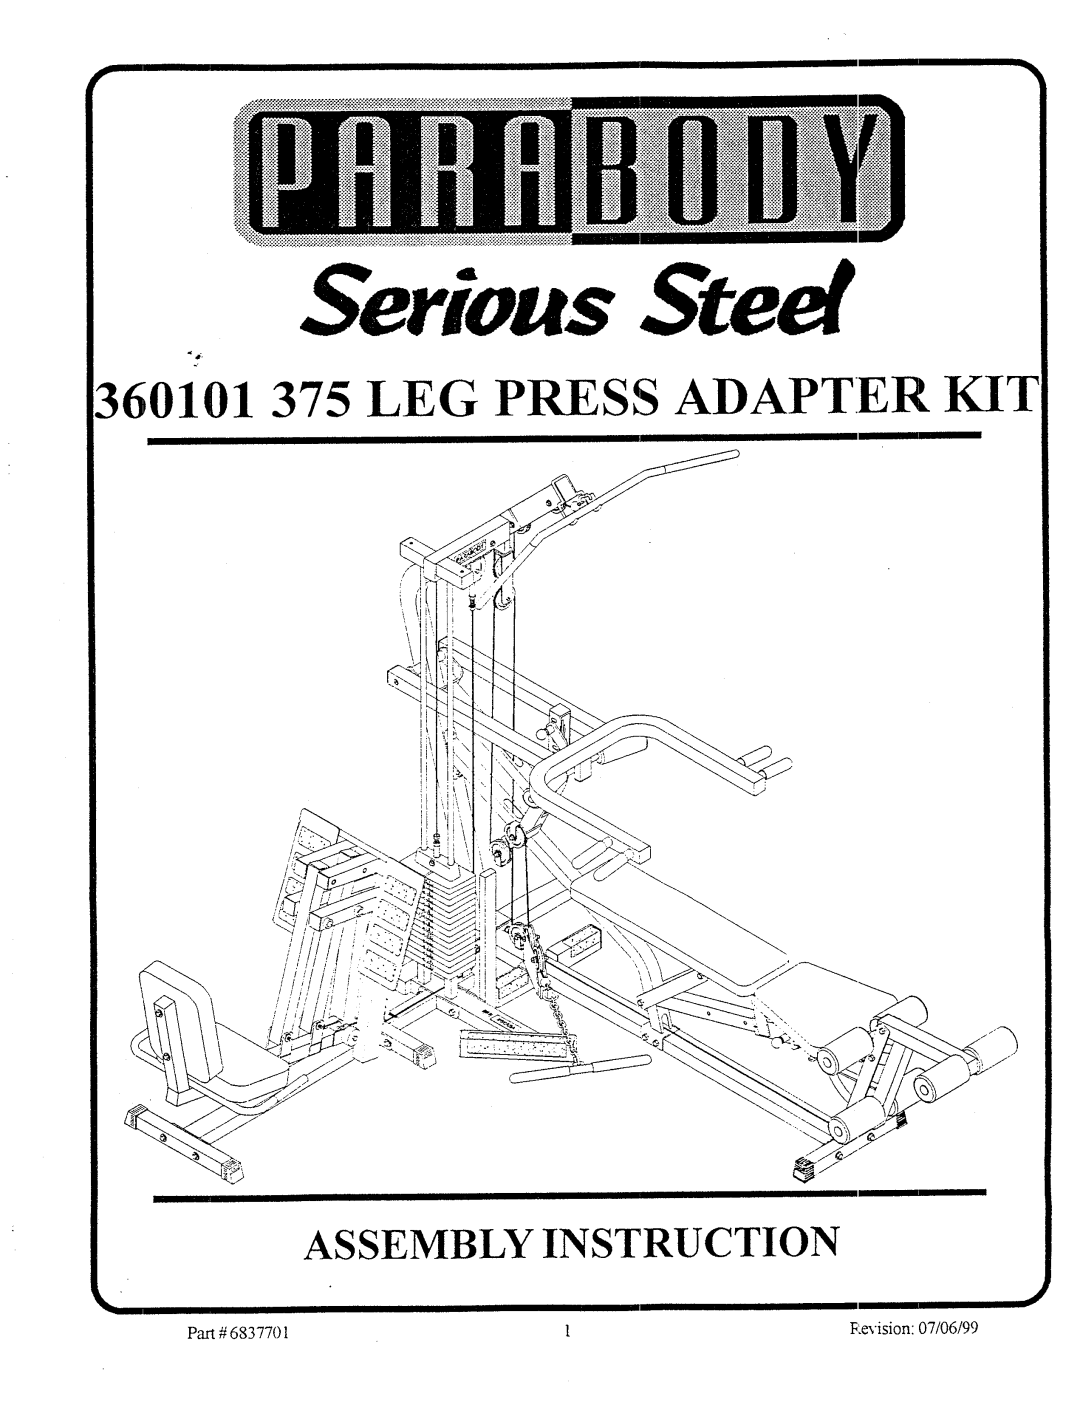 Life Fitness manual Serious Steel, 1360101 375 LEG PRESS ADAPTER KITi, Assembly Instruction, 6837701, Eevision07/06/99 